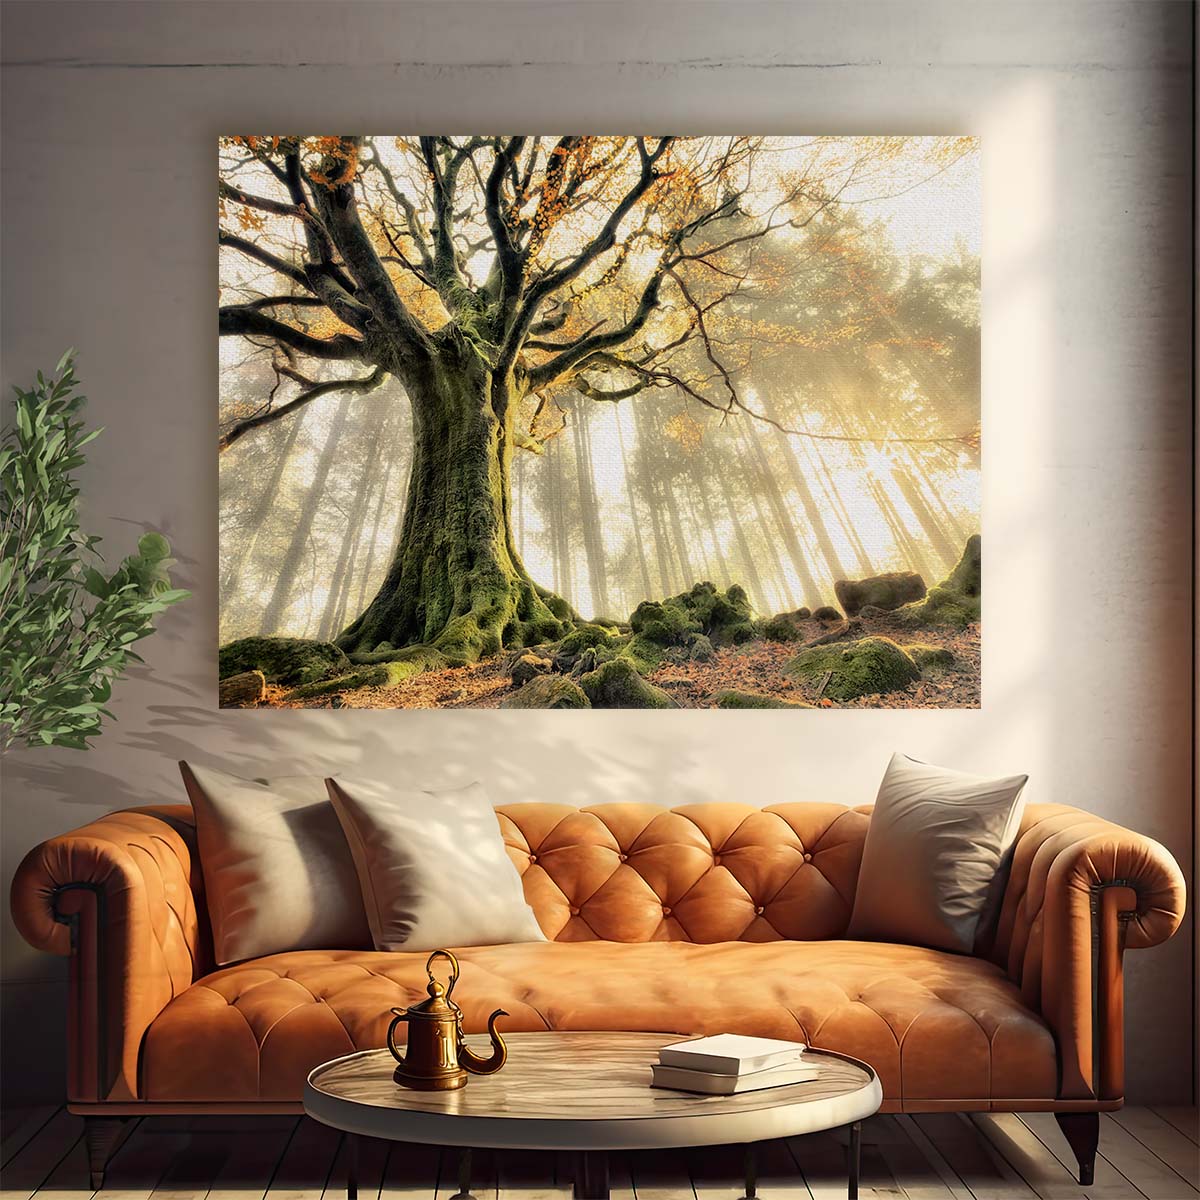 Golden Autumn Sunrise Forest Fantasy Wall Art by Luxuriance Designs. Made in USA.